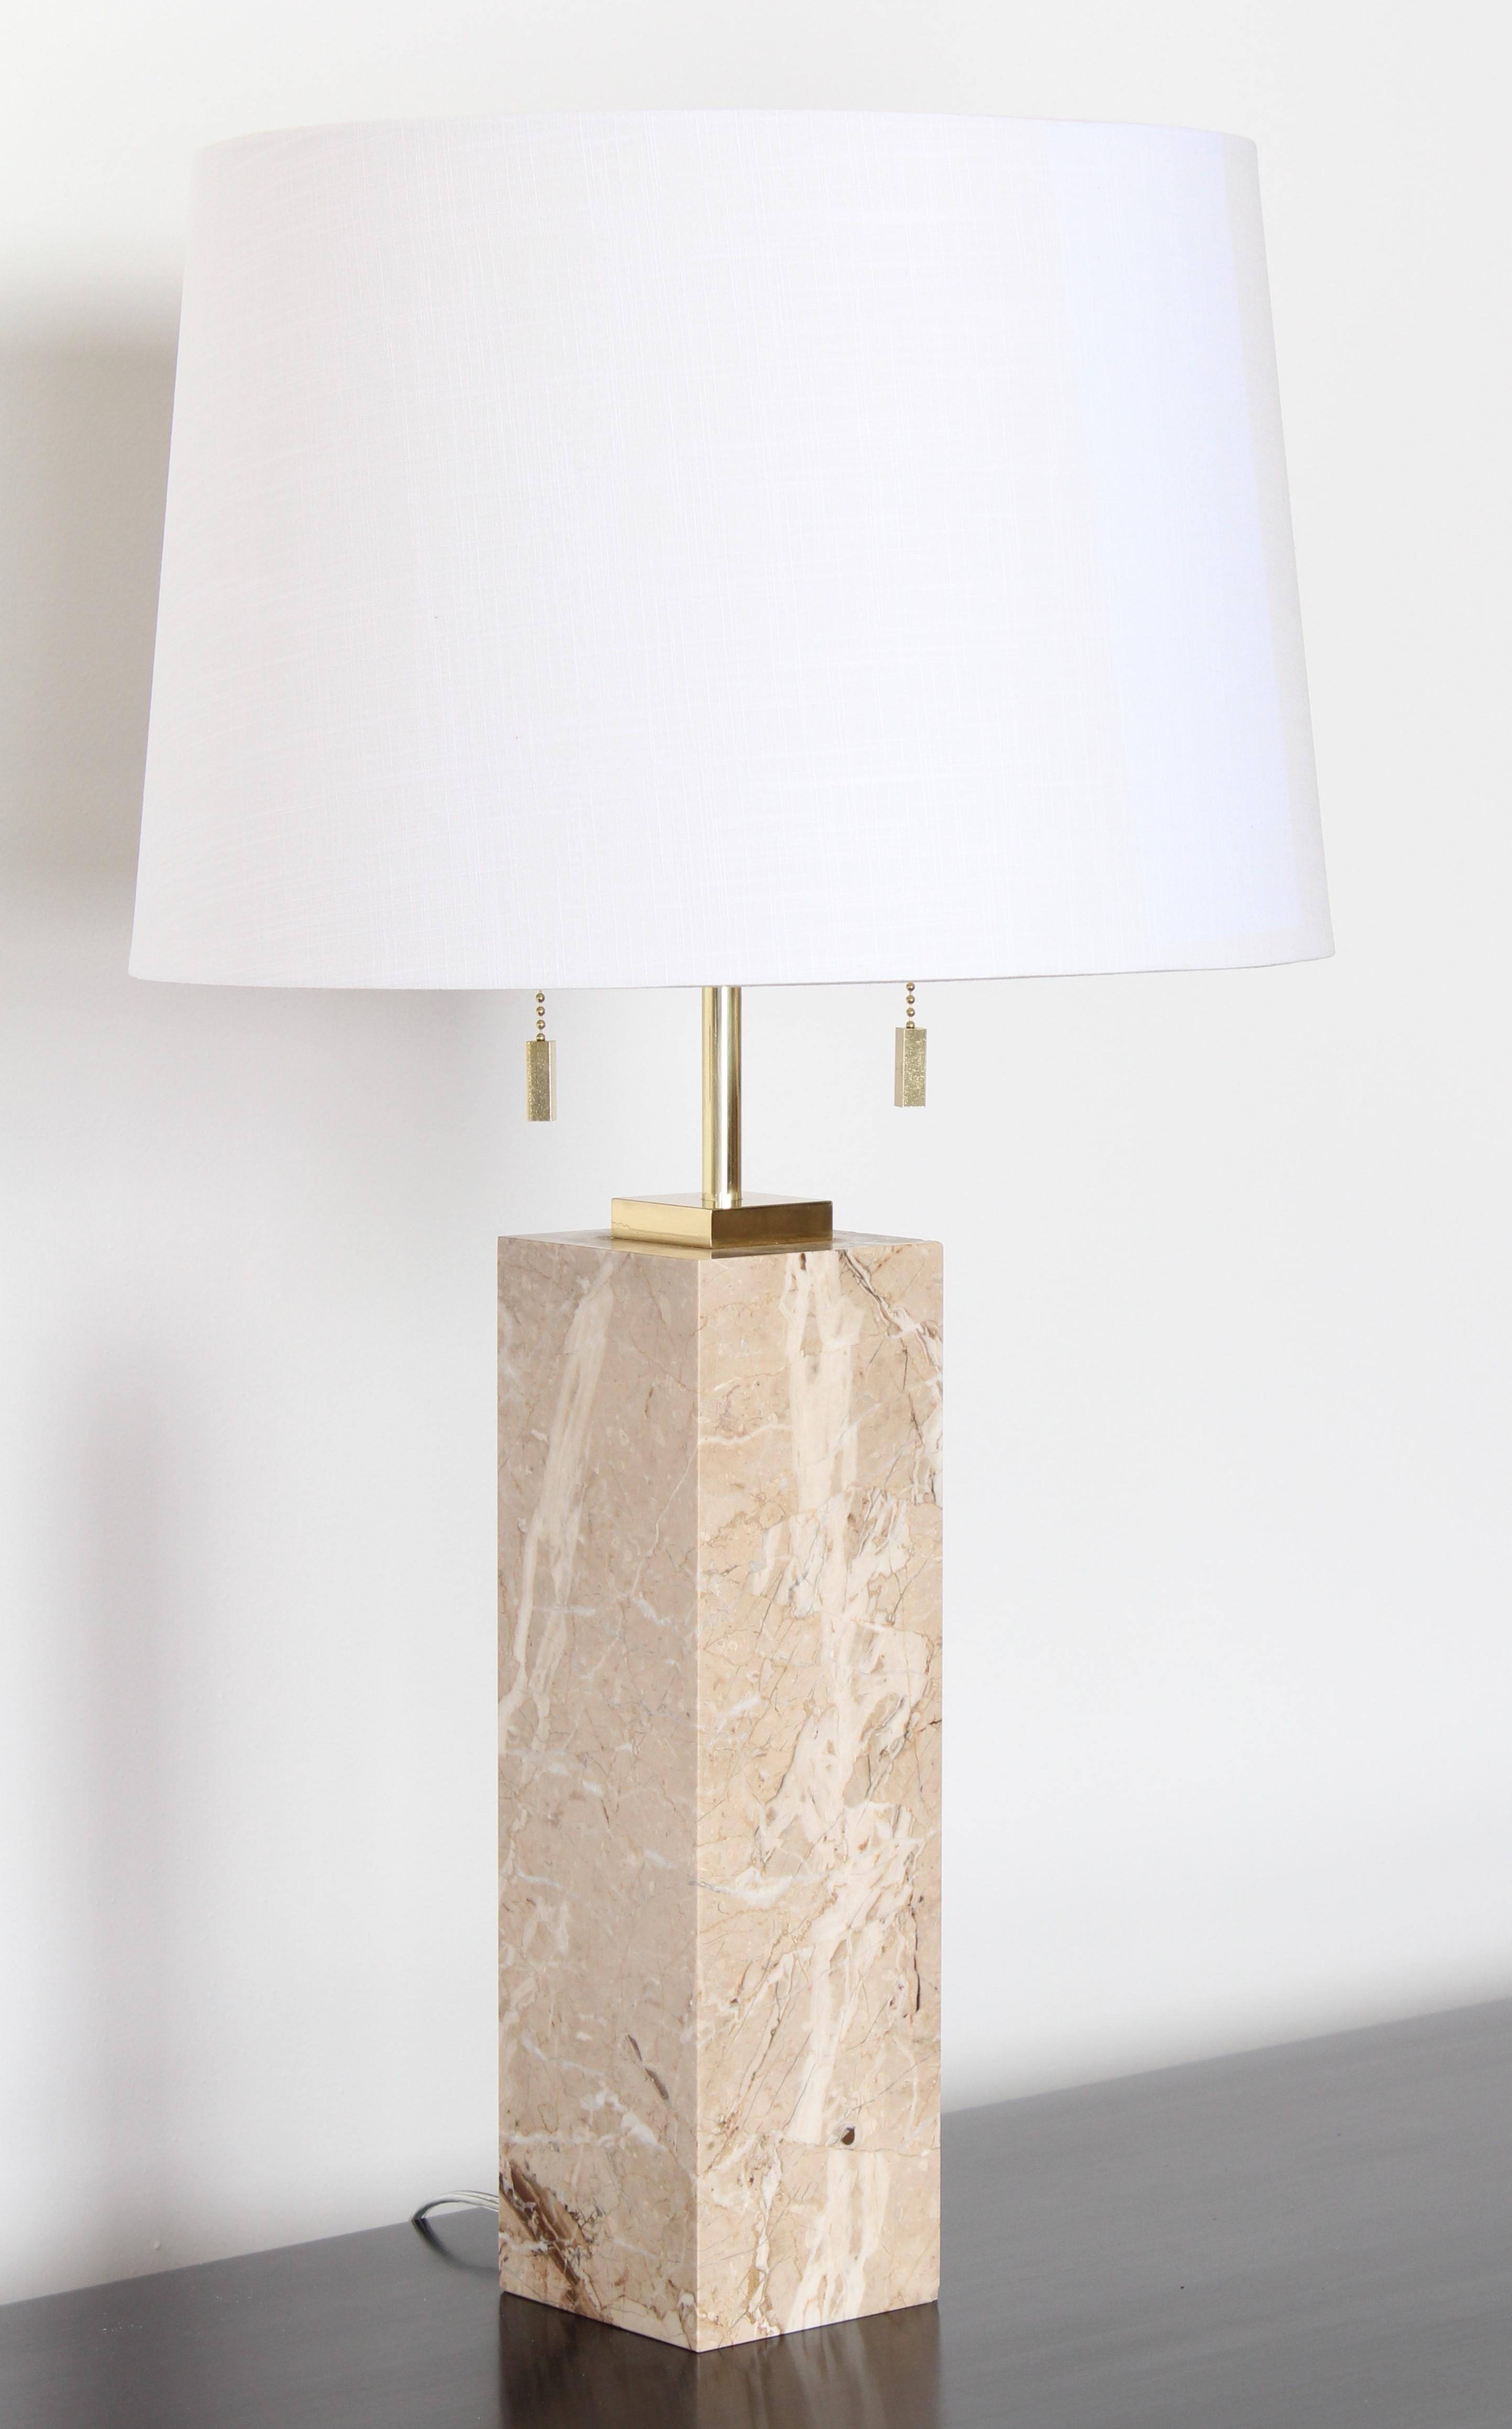 A Robsjohn-Gibbings marble lamp with tan, white and brown tones by Hansen Lighting, 1950s. Recently rewired and new polished hardware. Shade not included.

Dimensions: 27